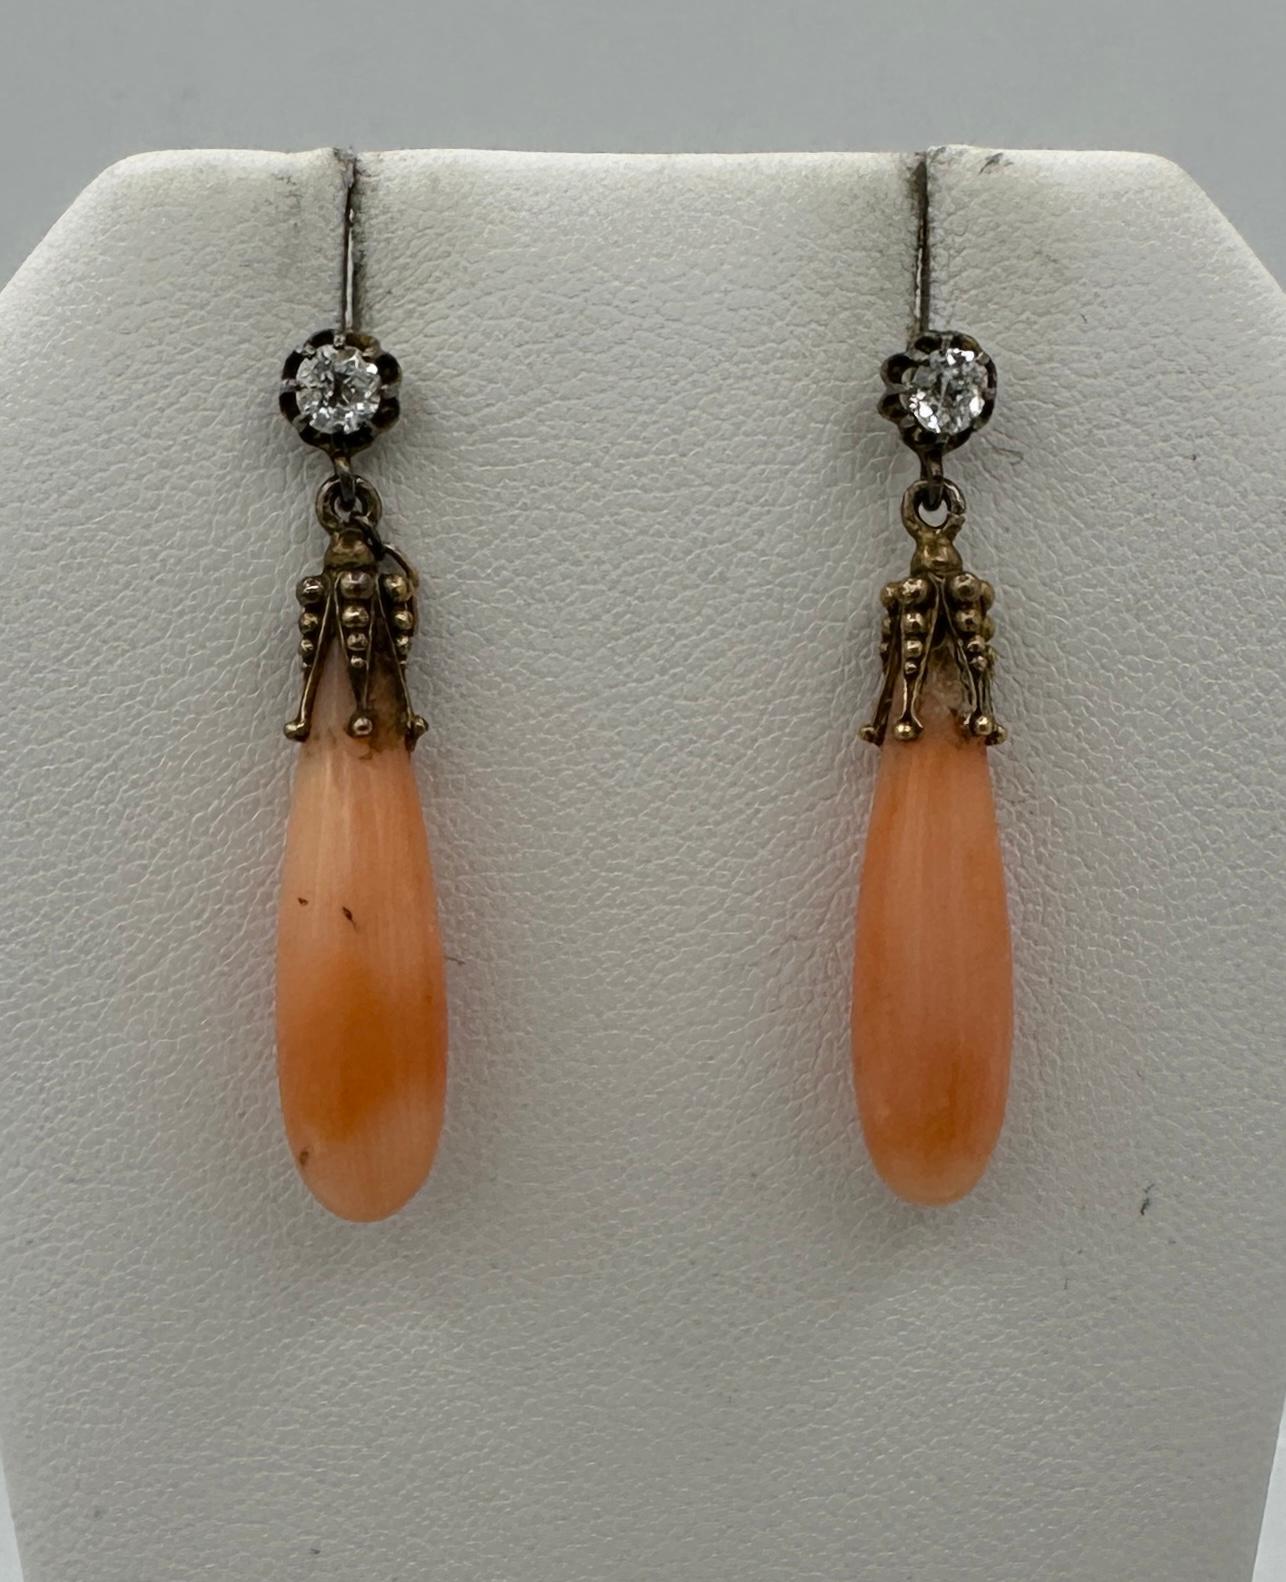 This is a gorgeous pair of antique Victorian Coral and Old Mine Cut Diamond Dangle Drop Earrings in 14 Karat Gold.  The wonderful Etruscan Revival dangle drop earrings are 1 3/8 inches long and have fabulous coral torpedo shape drops.  The coral is